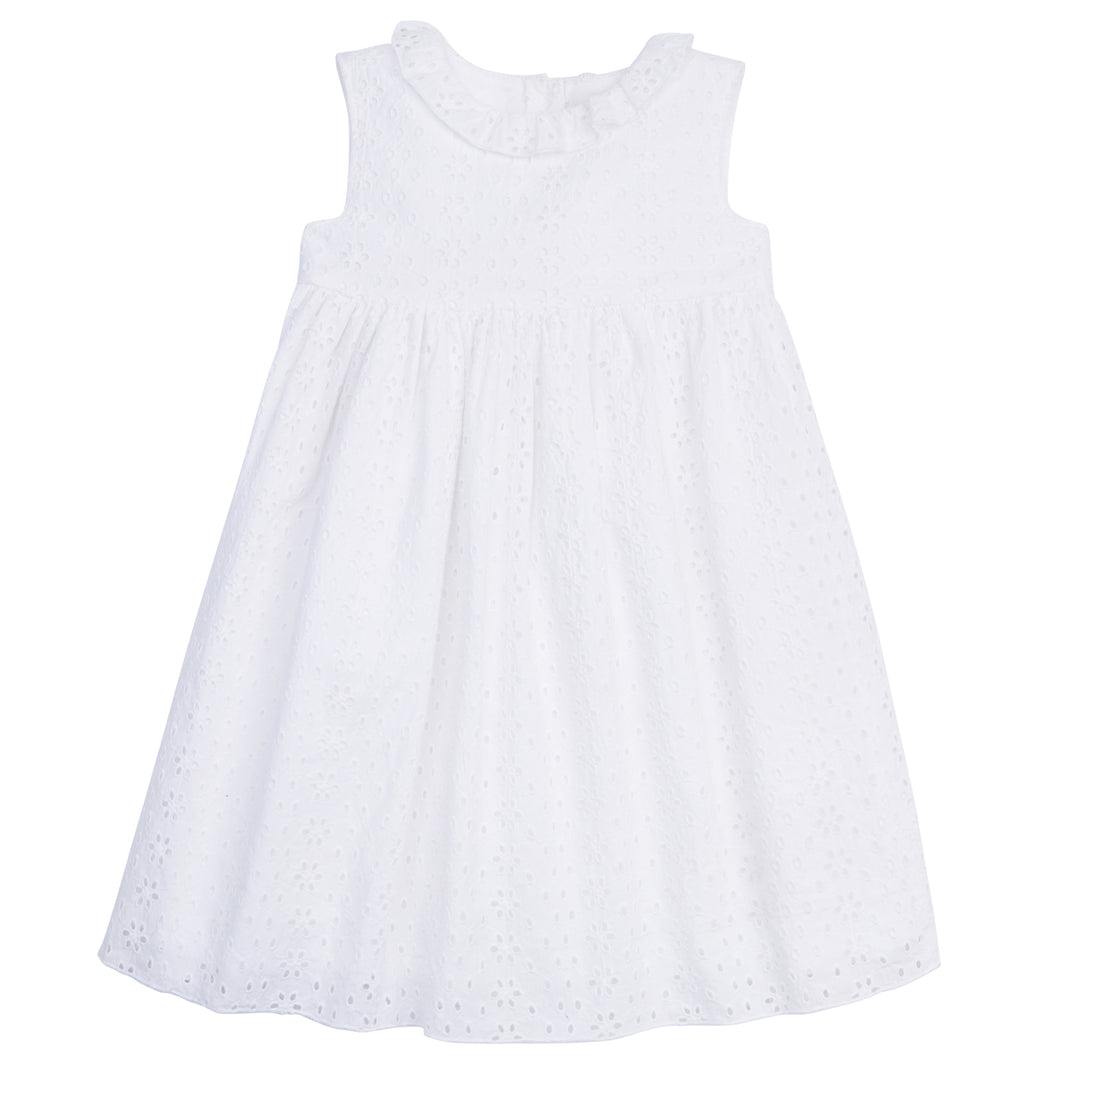 classic childrens clothing girls sundress with ruffle neck line in eyelet material